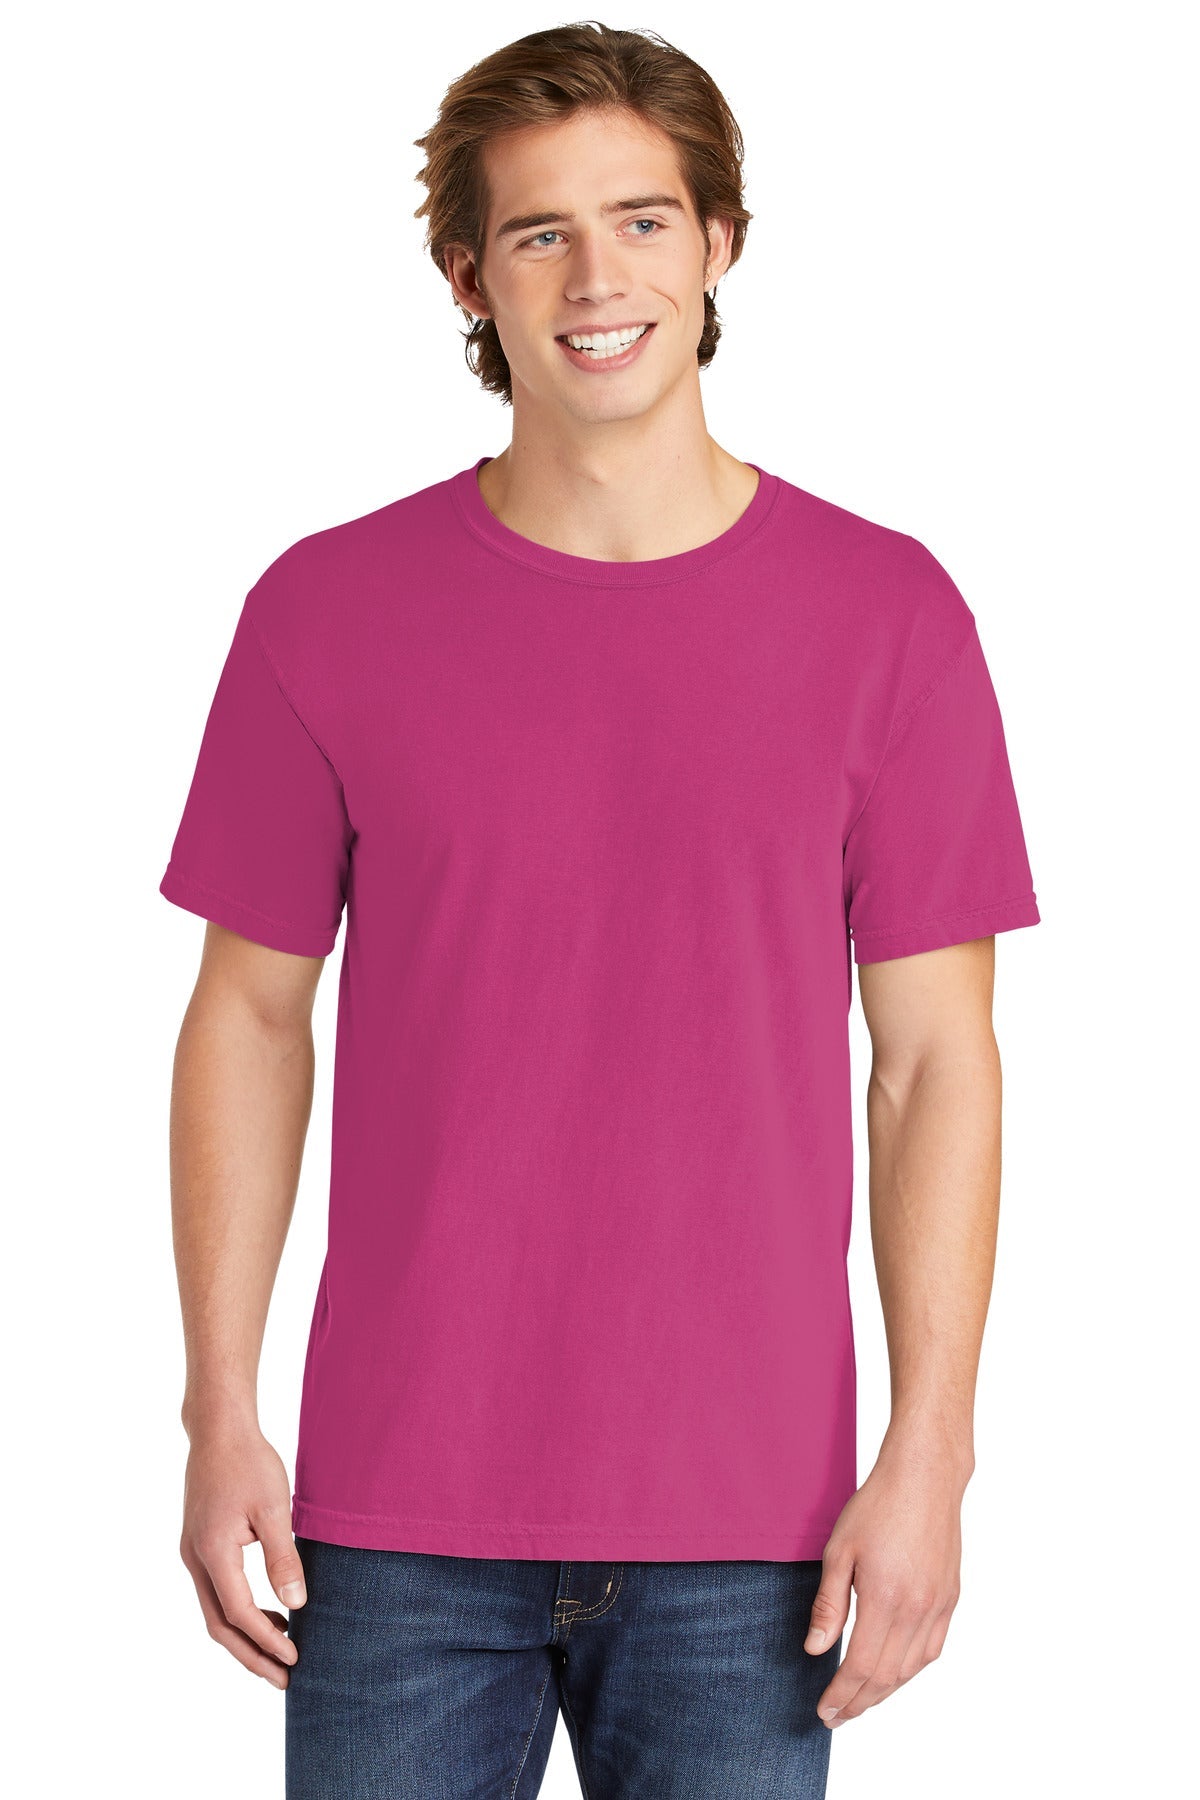 COMFORT COLORS ® Heavyweight Ring Spun Tee. 1717 [Heliconia] - DFW Impression